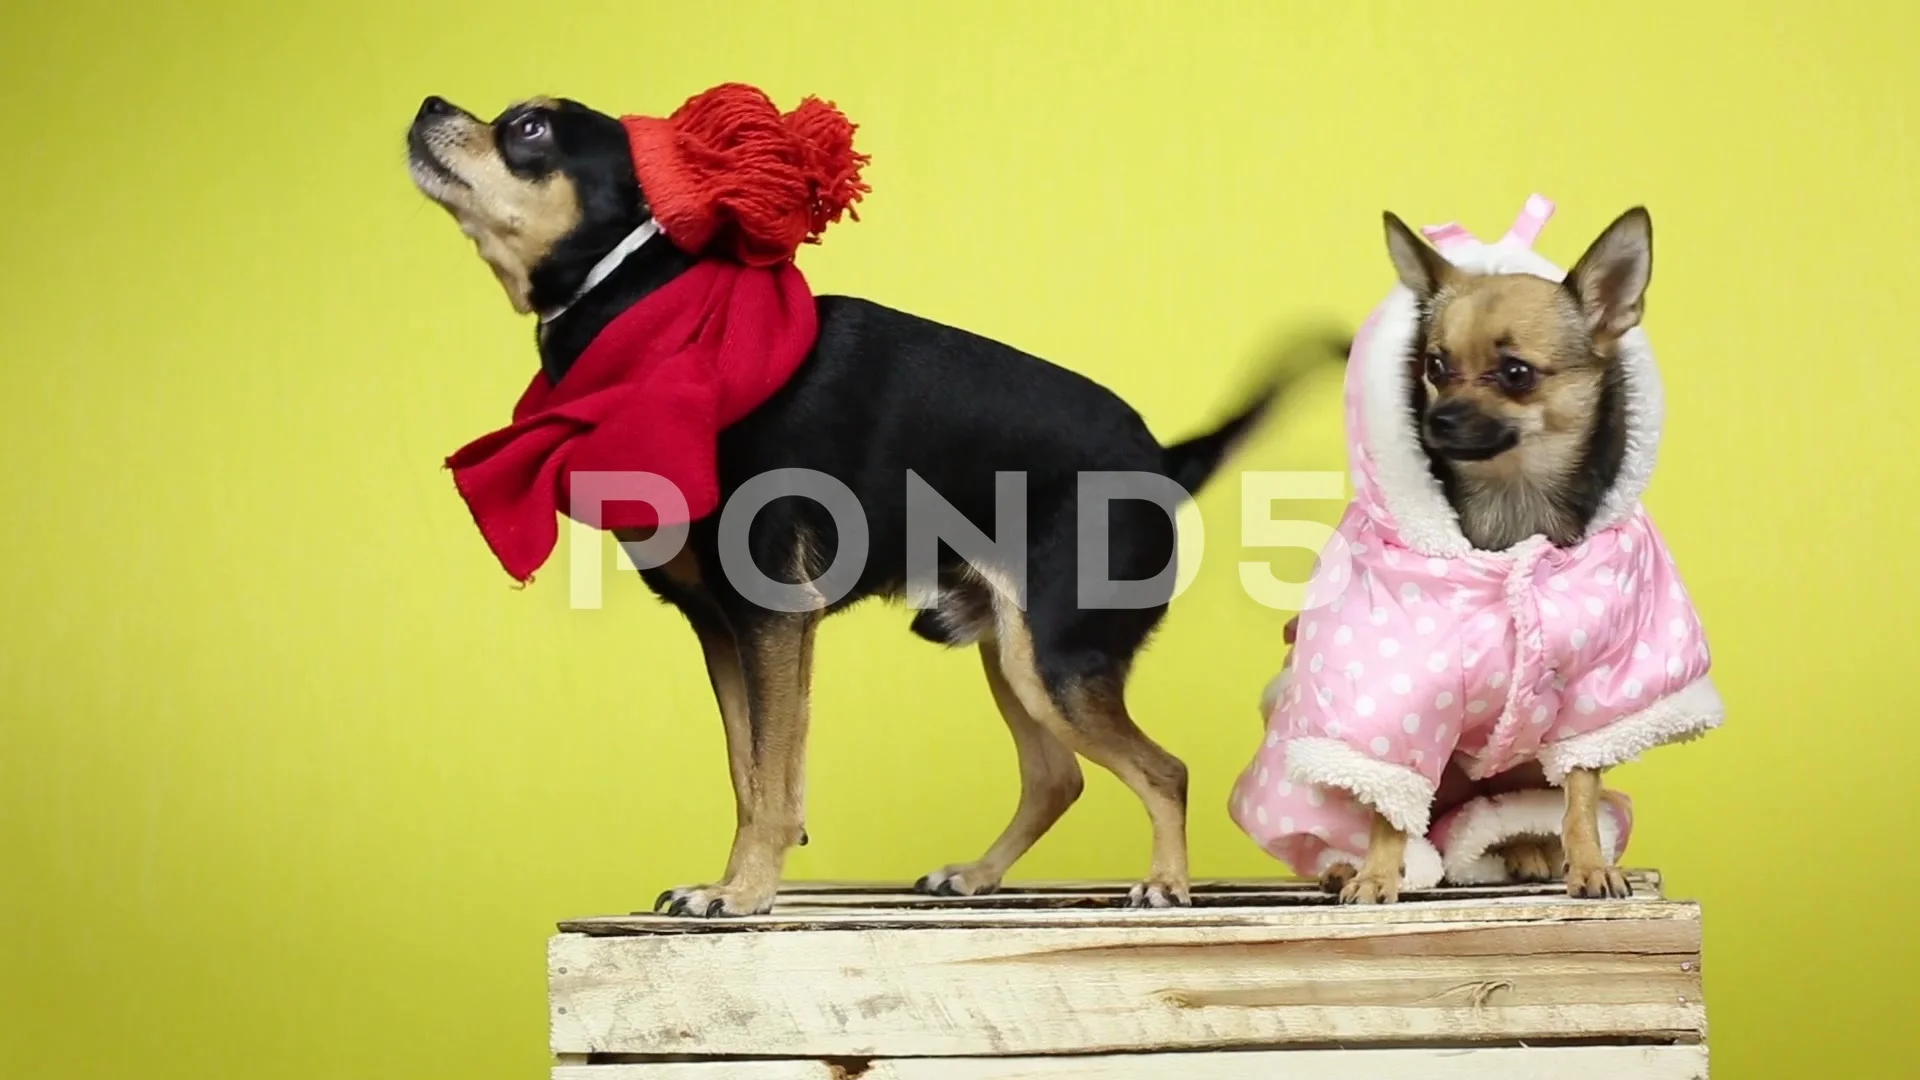 funny dogs in clothes